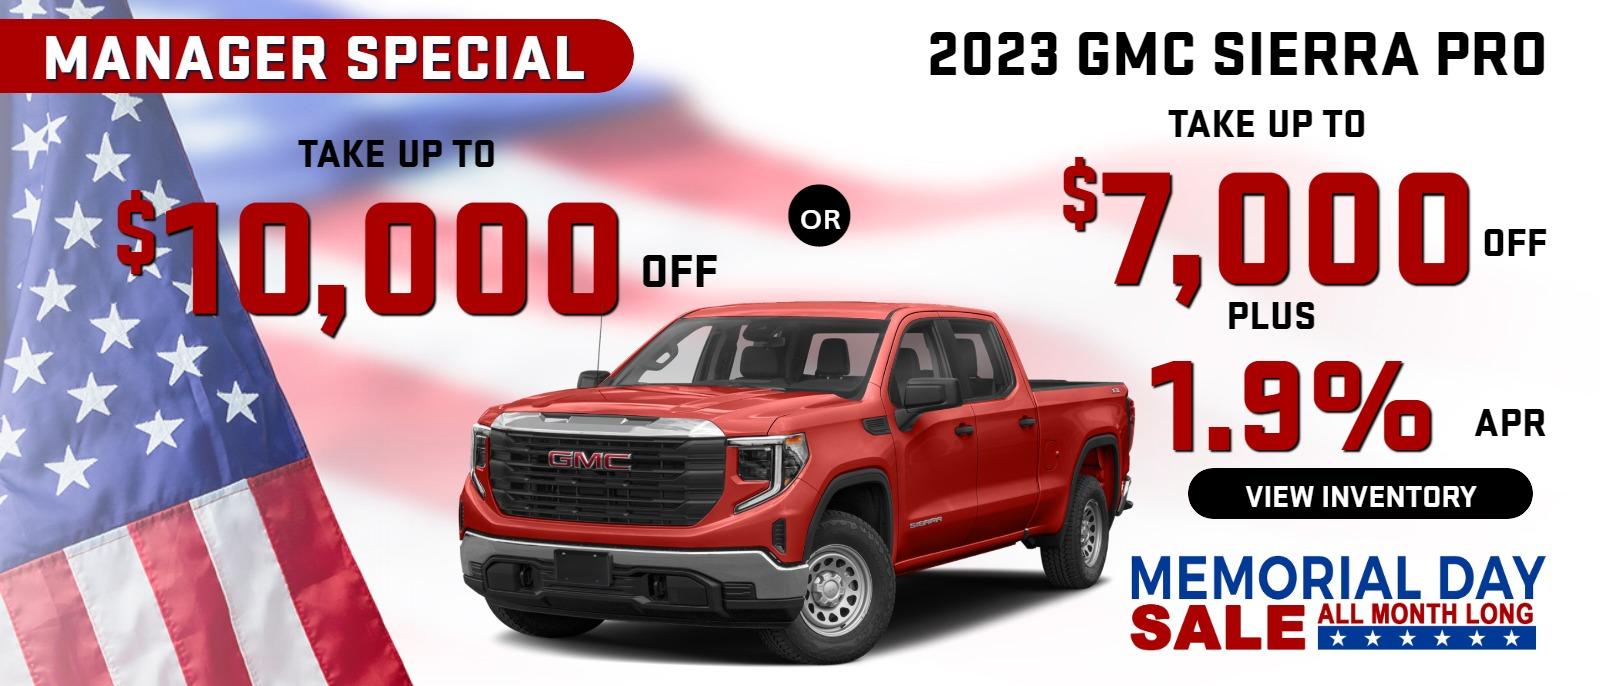 2023 Sierra PRO MANAGER SPECIAL
Stock G8974

take up to $7000 OFF
PLUS OR take up to $10,000.00 OFF
1.9% finance